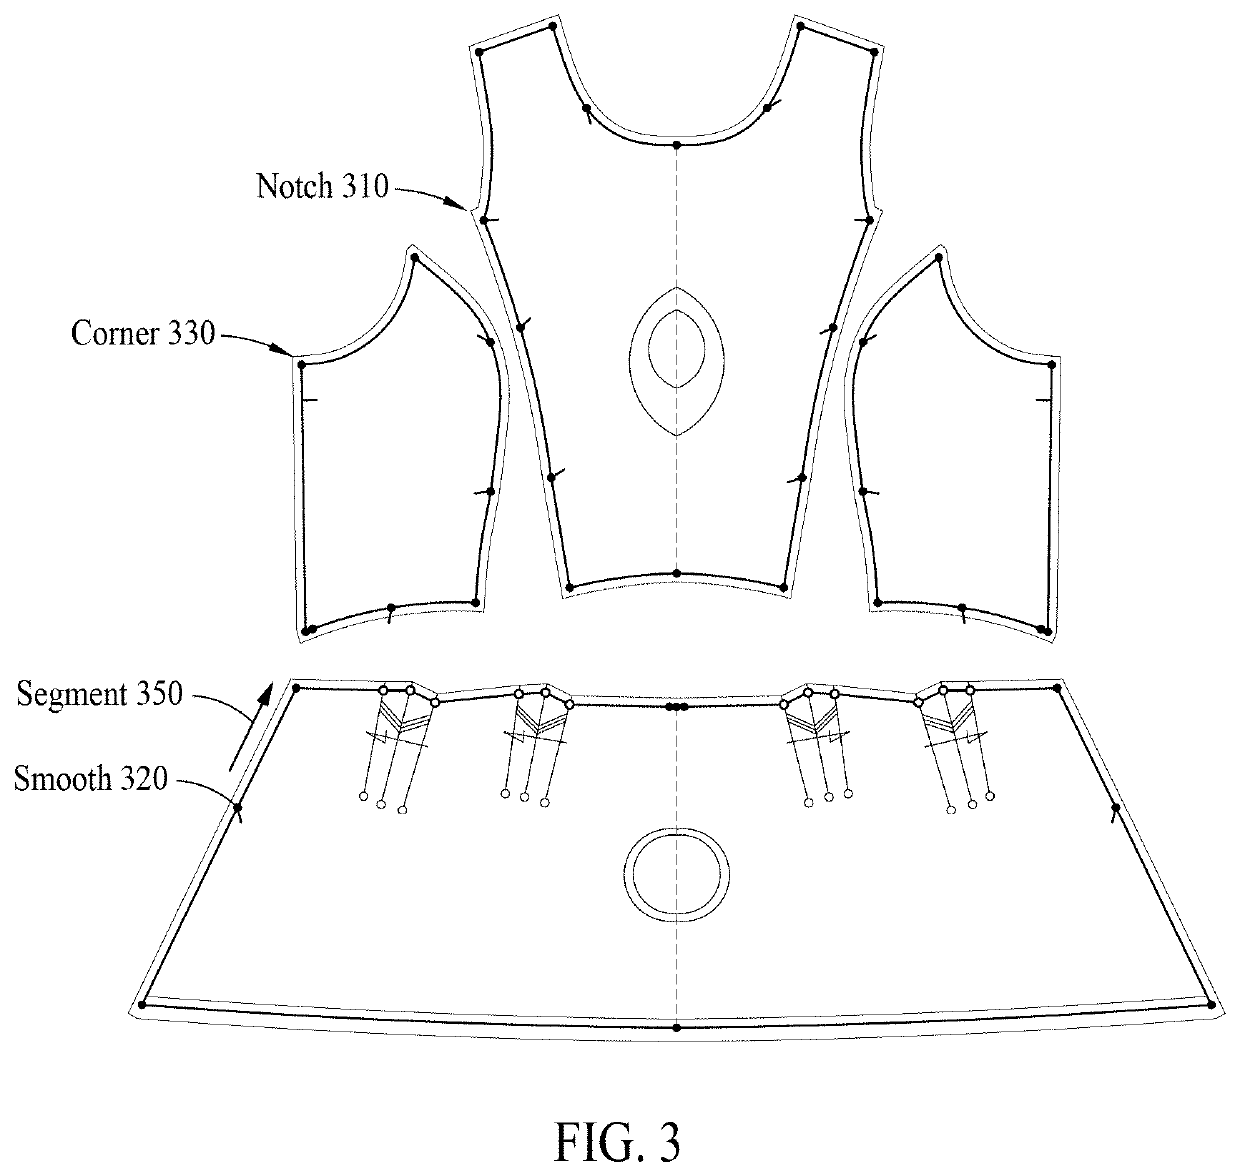 Automatic determination of sewing lines for assemblying pattern pieces of garment